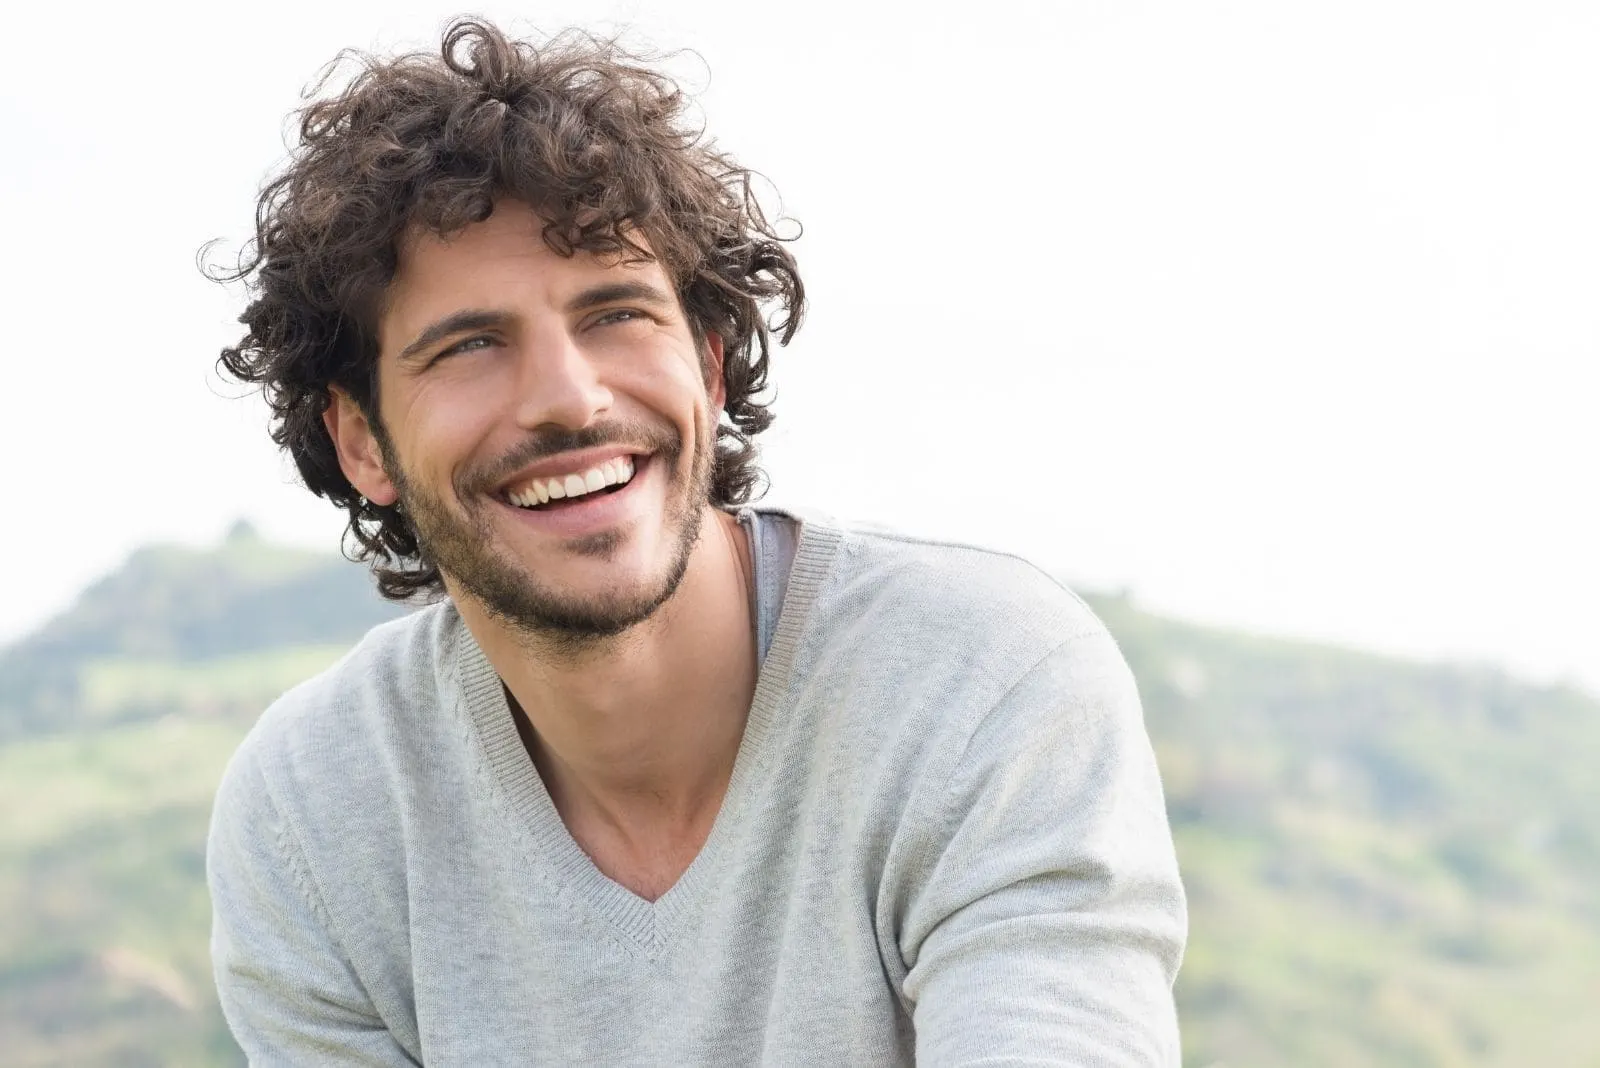 portrait of a happy man with curly hair sitting outdoors and smiling